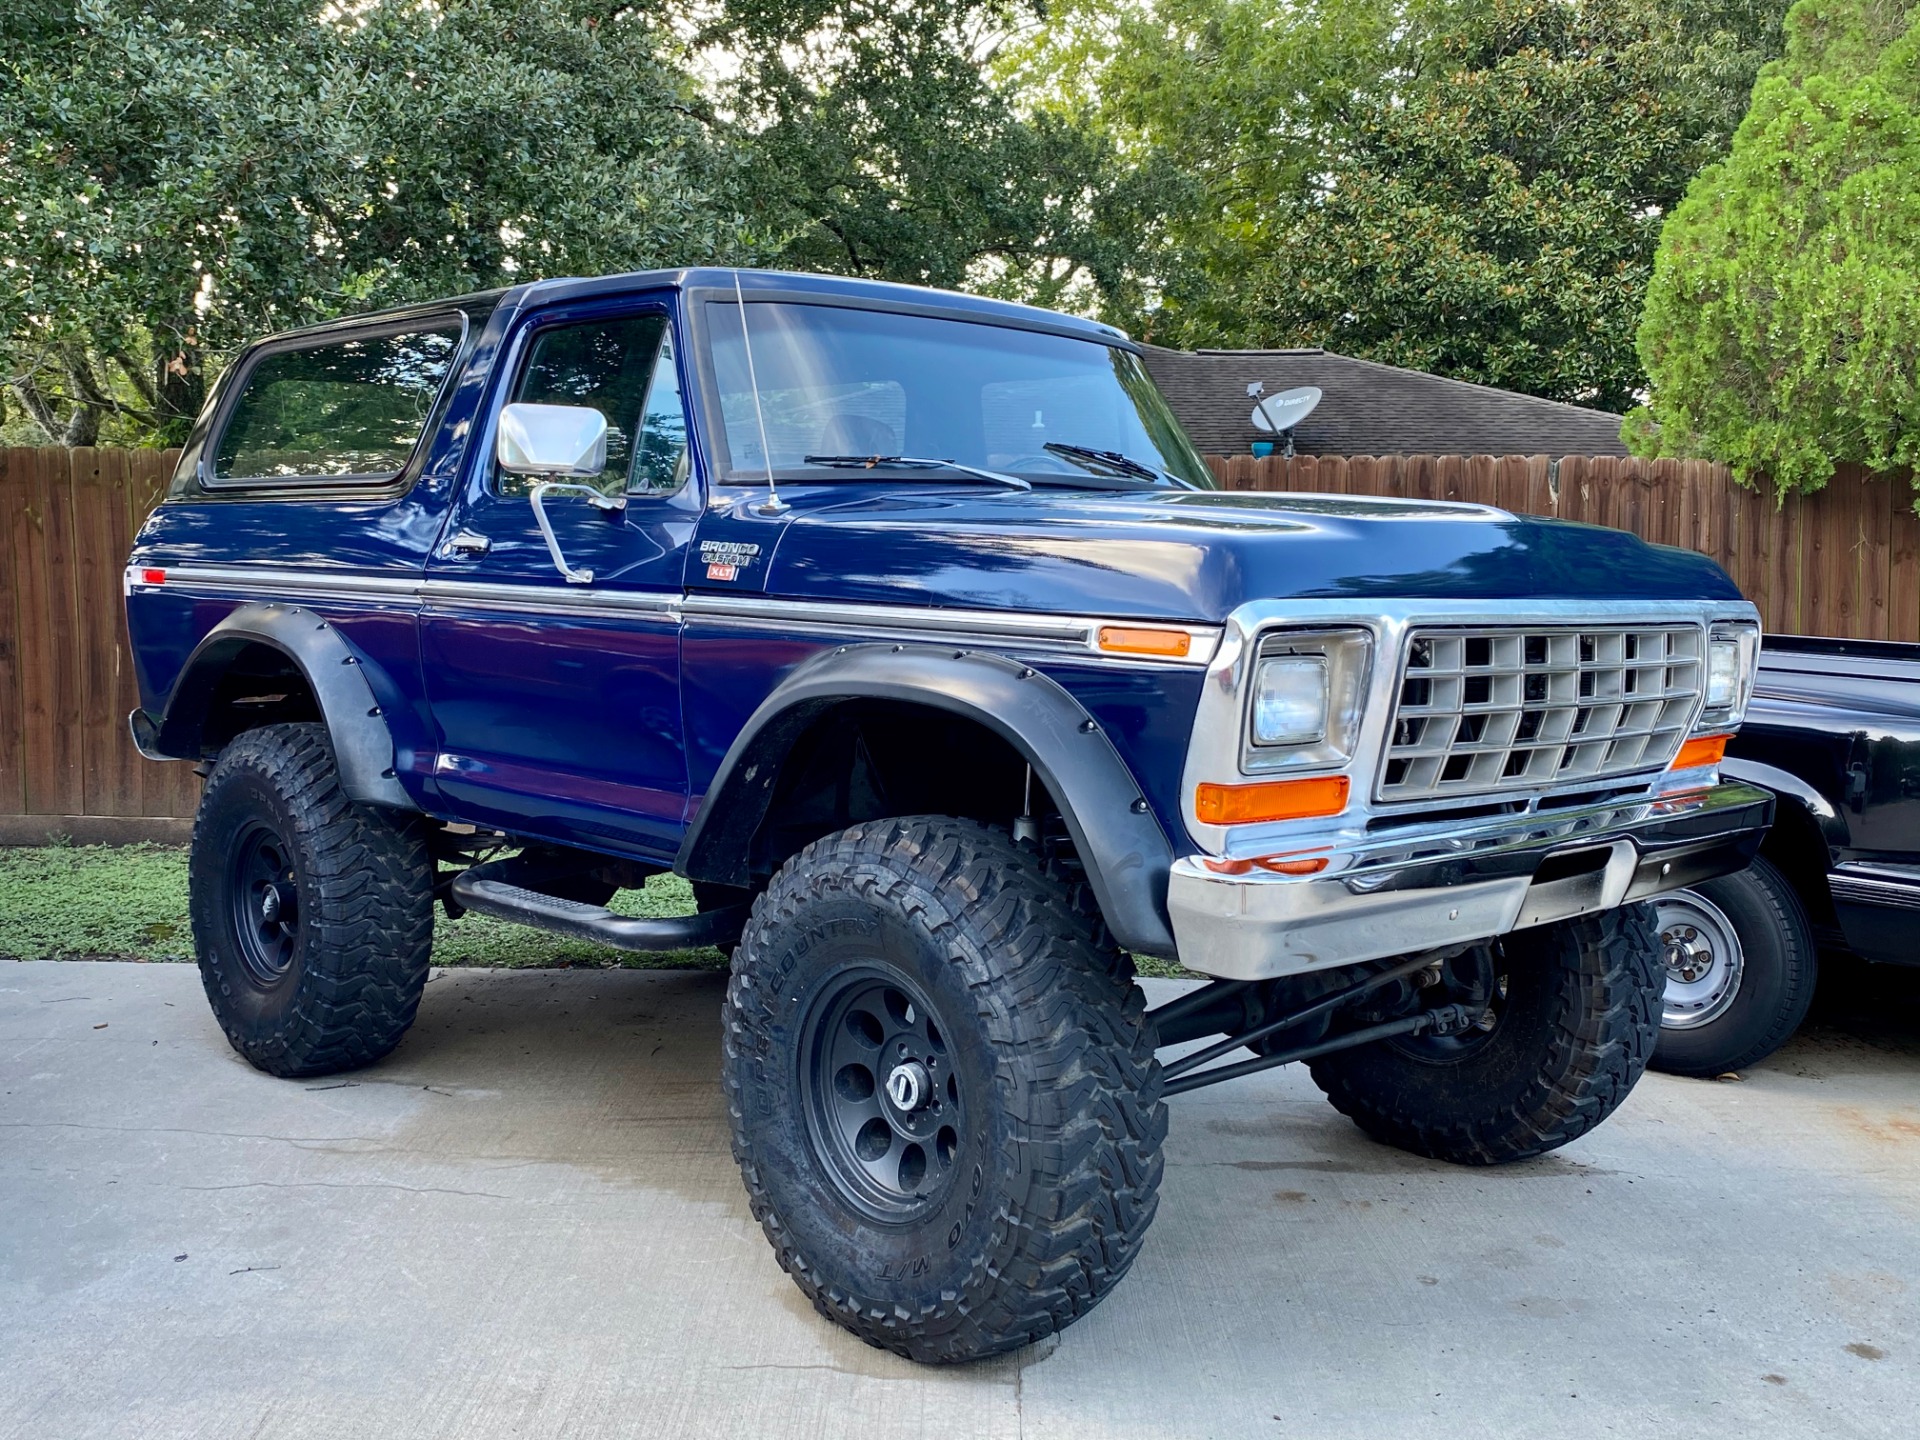 Used 1979 Ford Bronco Xlt For Sale 26995 Select Jeeps Inc Stock